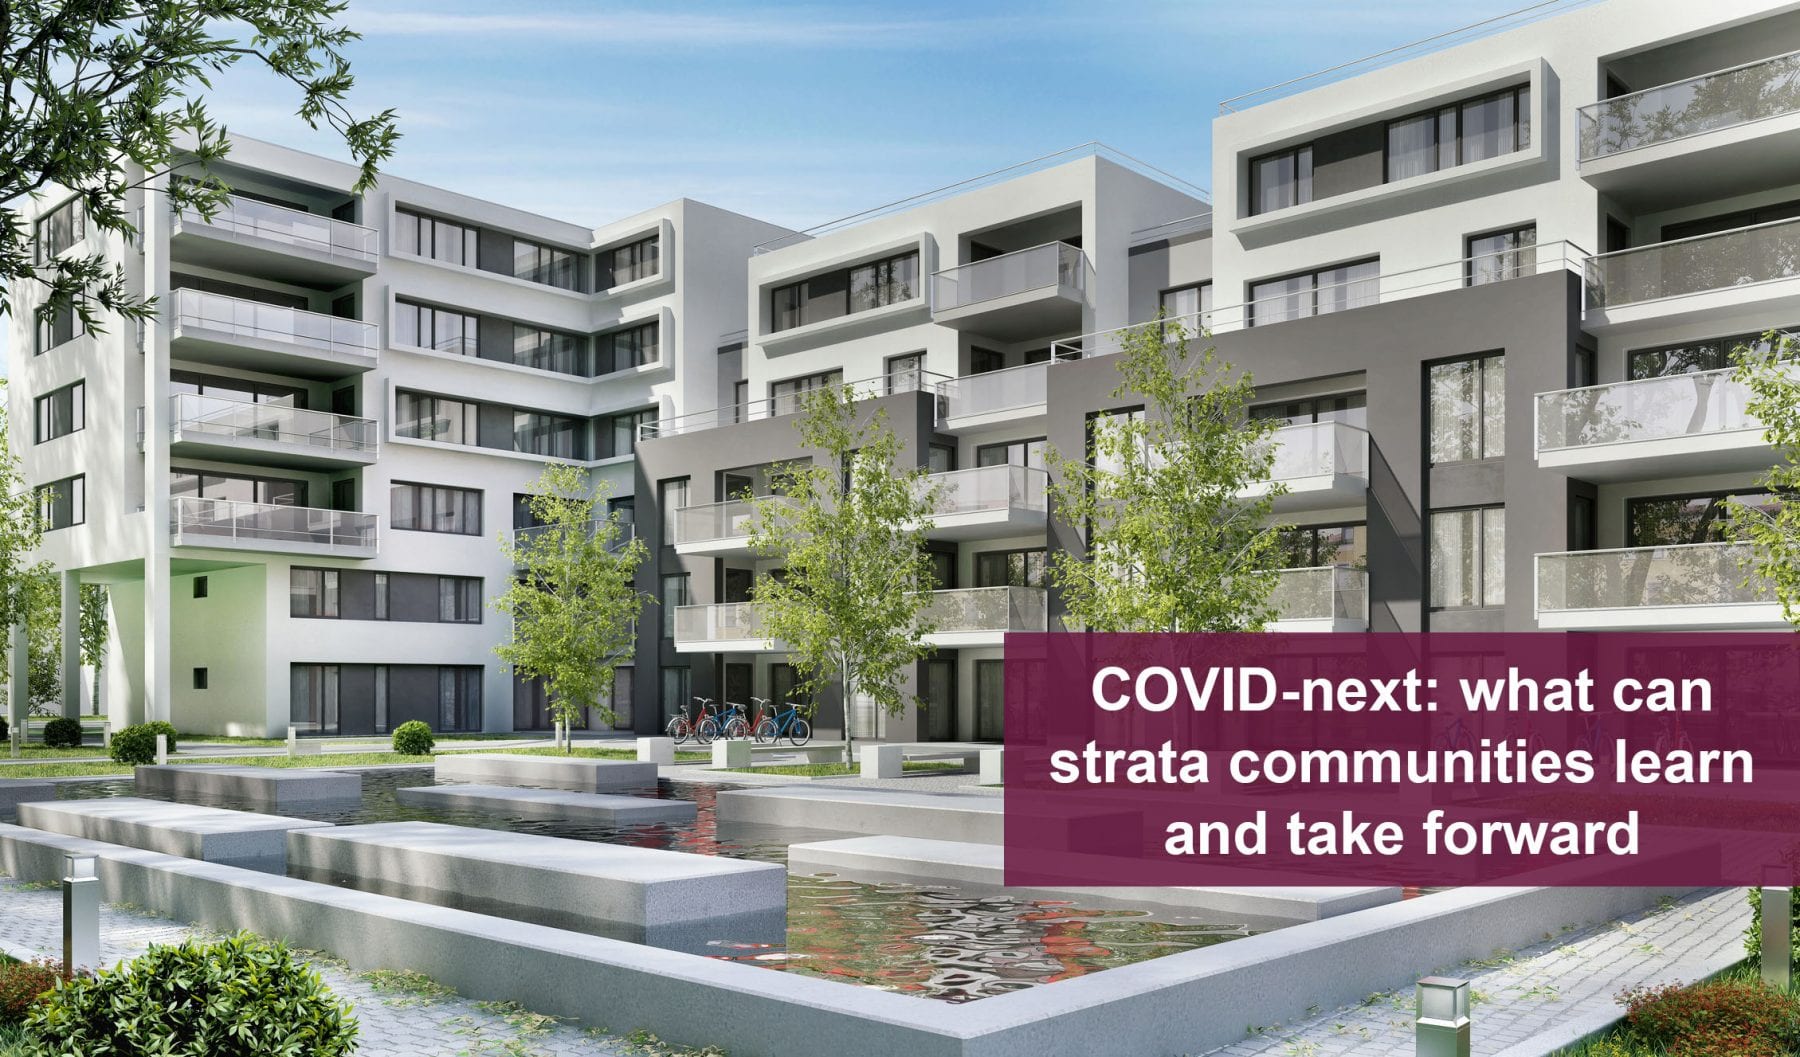 COVID-next: what can strata communities learn and take forward